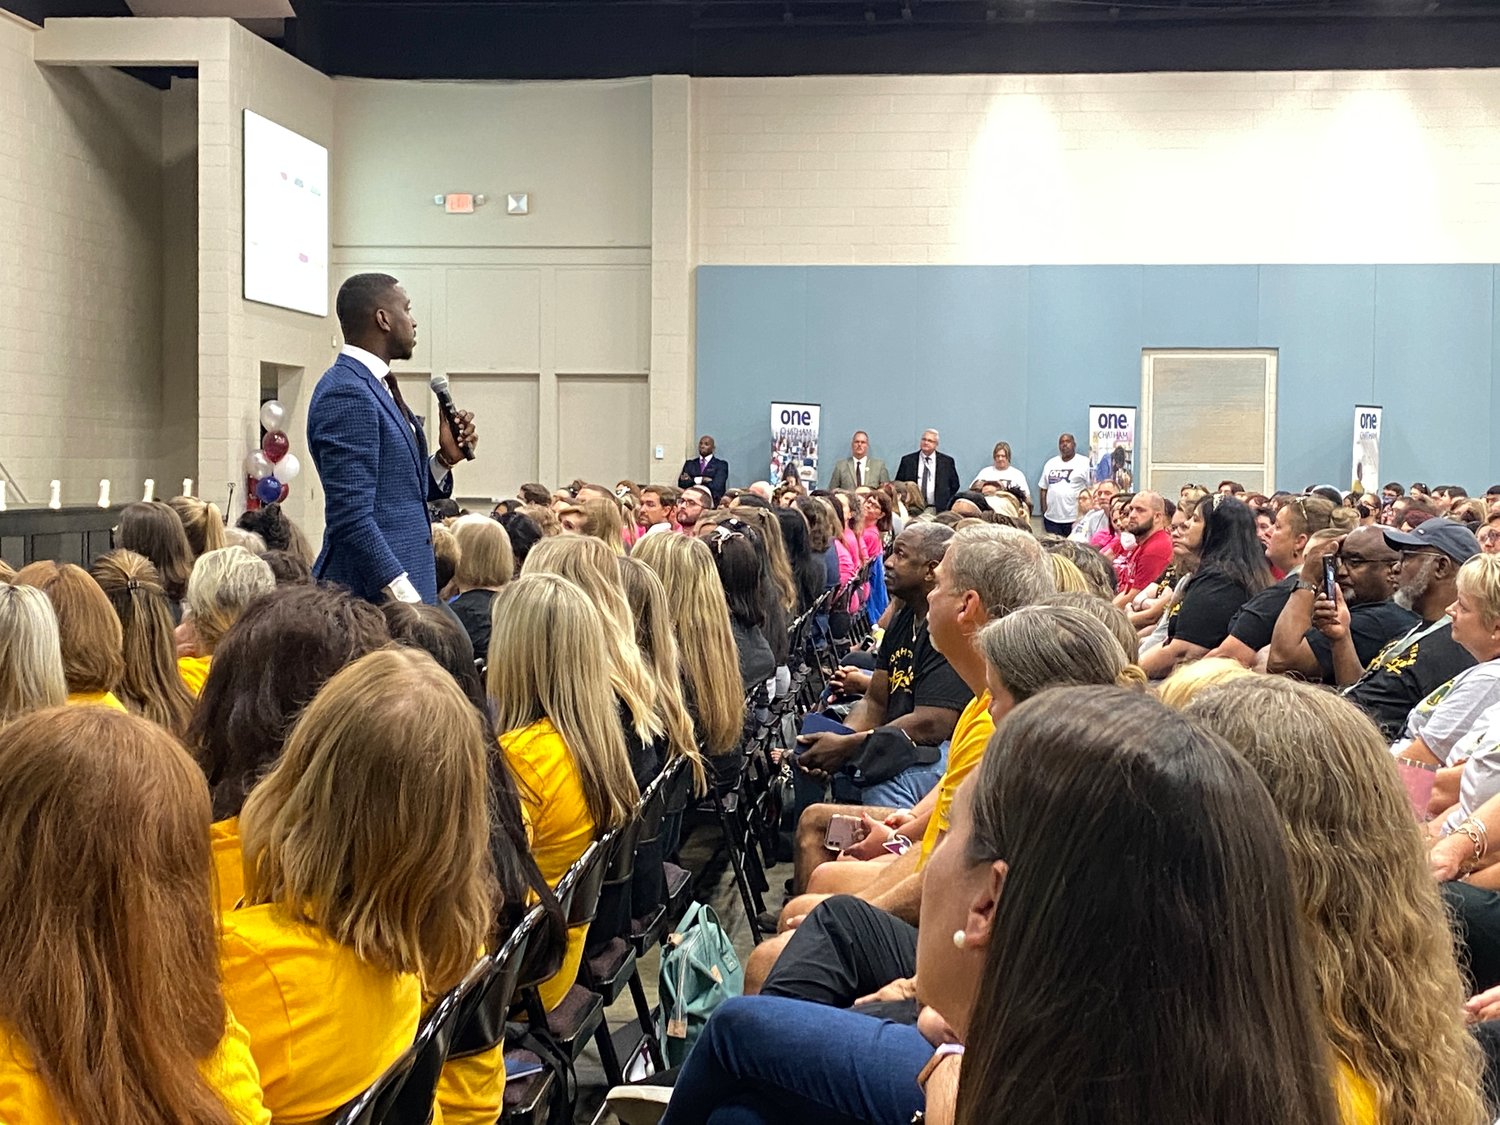 Michael Bonner addressed issues in education and spoke about some of the best ways to positively engage with students and colleagues.